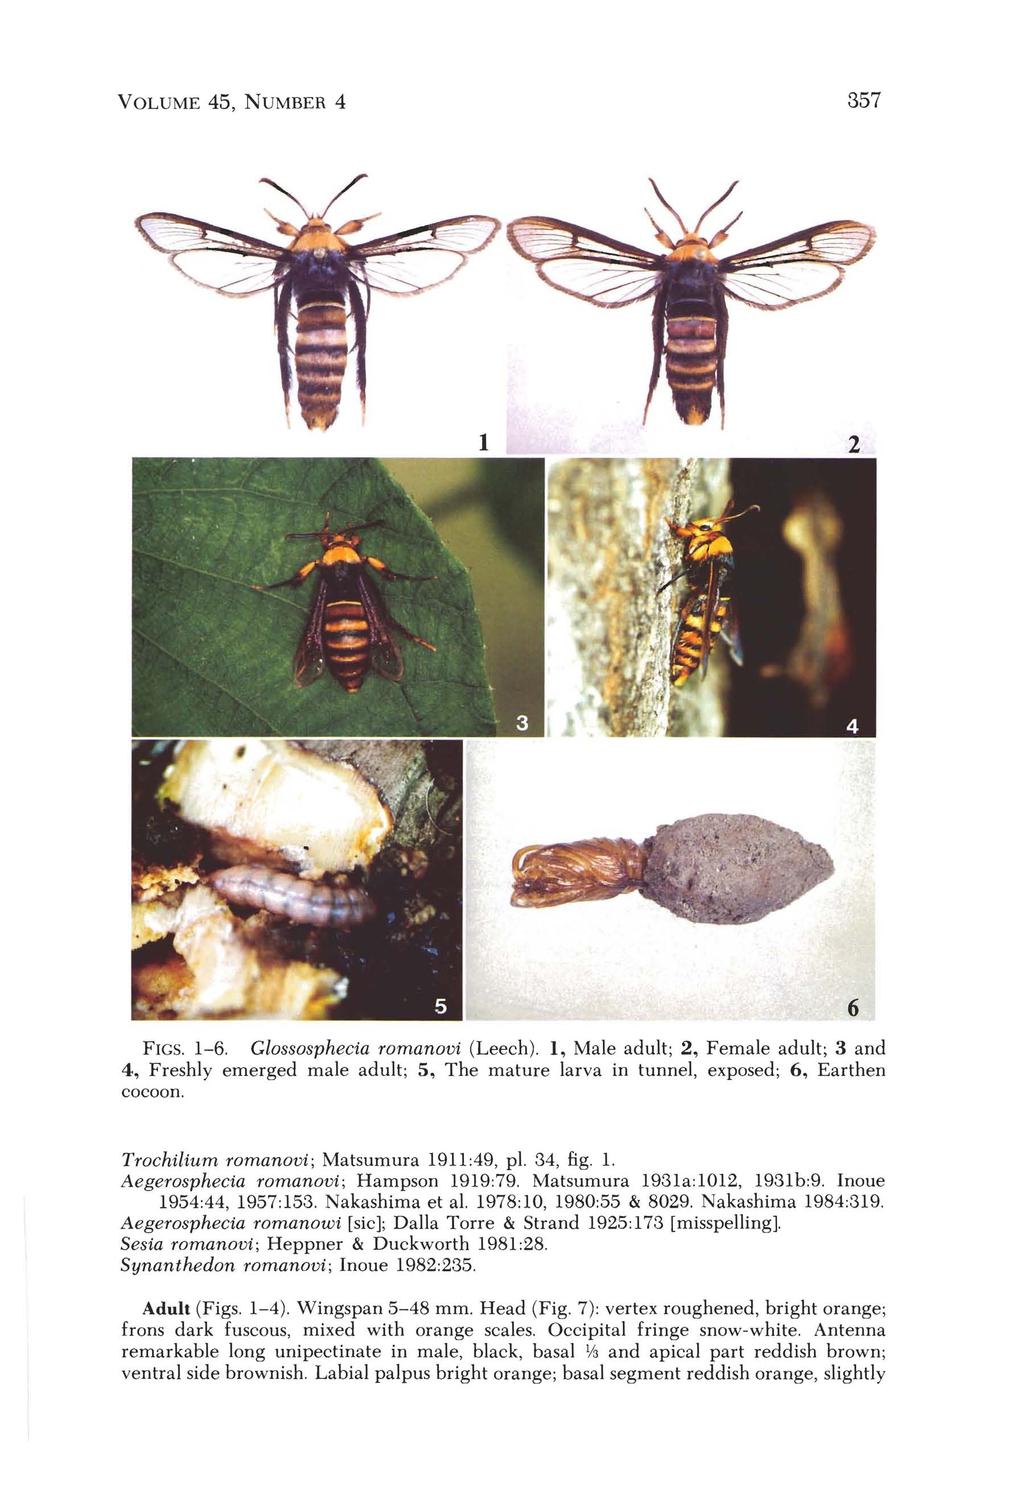 VOLUME 45, NUMBER 4 357 FIGS, 1-6, Glossosphecia romanovi (Leech), 1, Male adult; 2, Female adult; 3 and 4, Freshly emerged male adult; 5, The mature larva in tunnel, exposed; 6, Earthen cocoon,